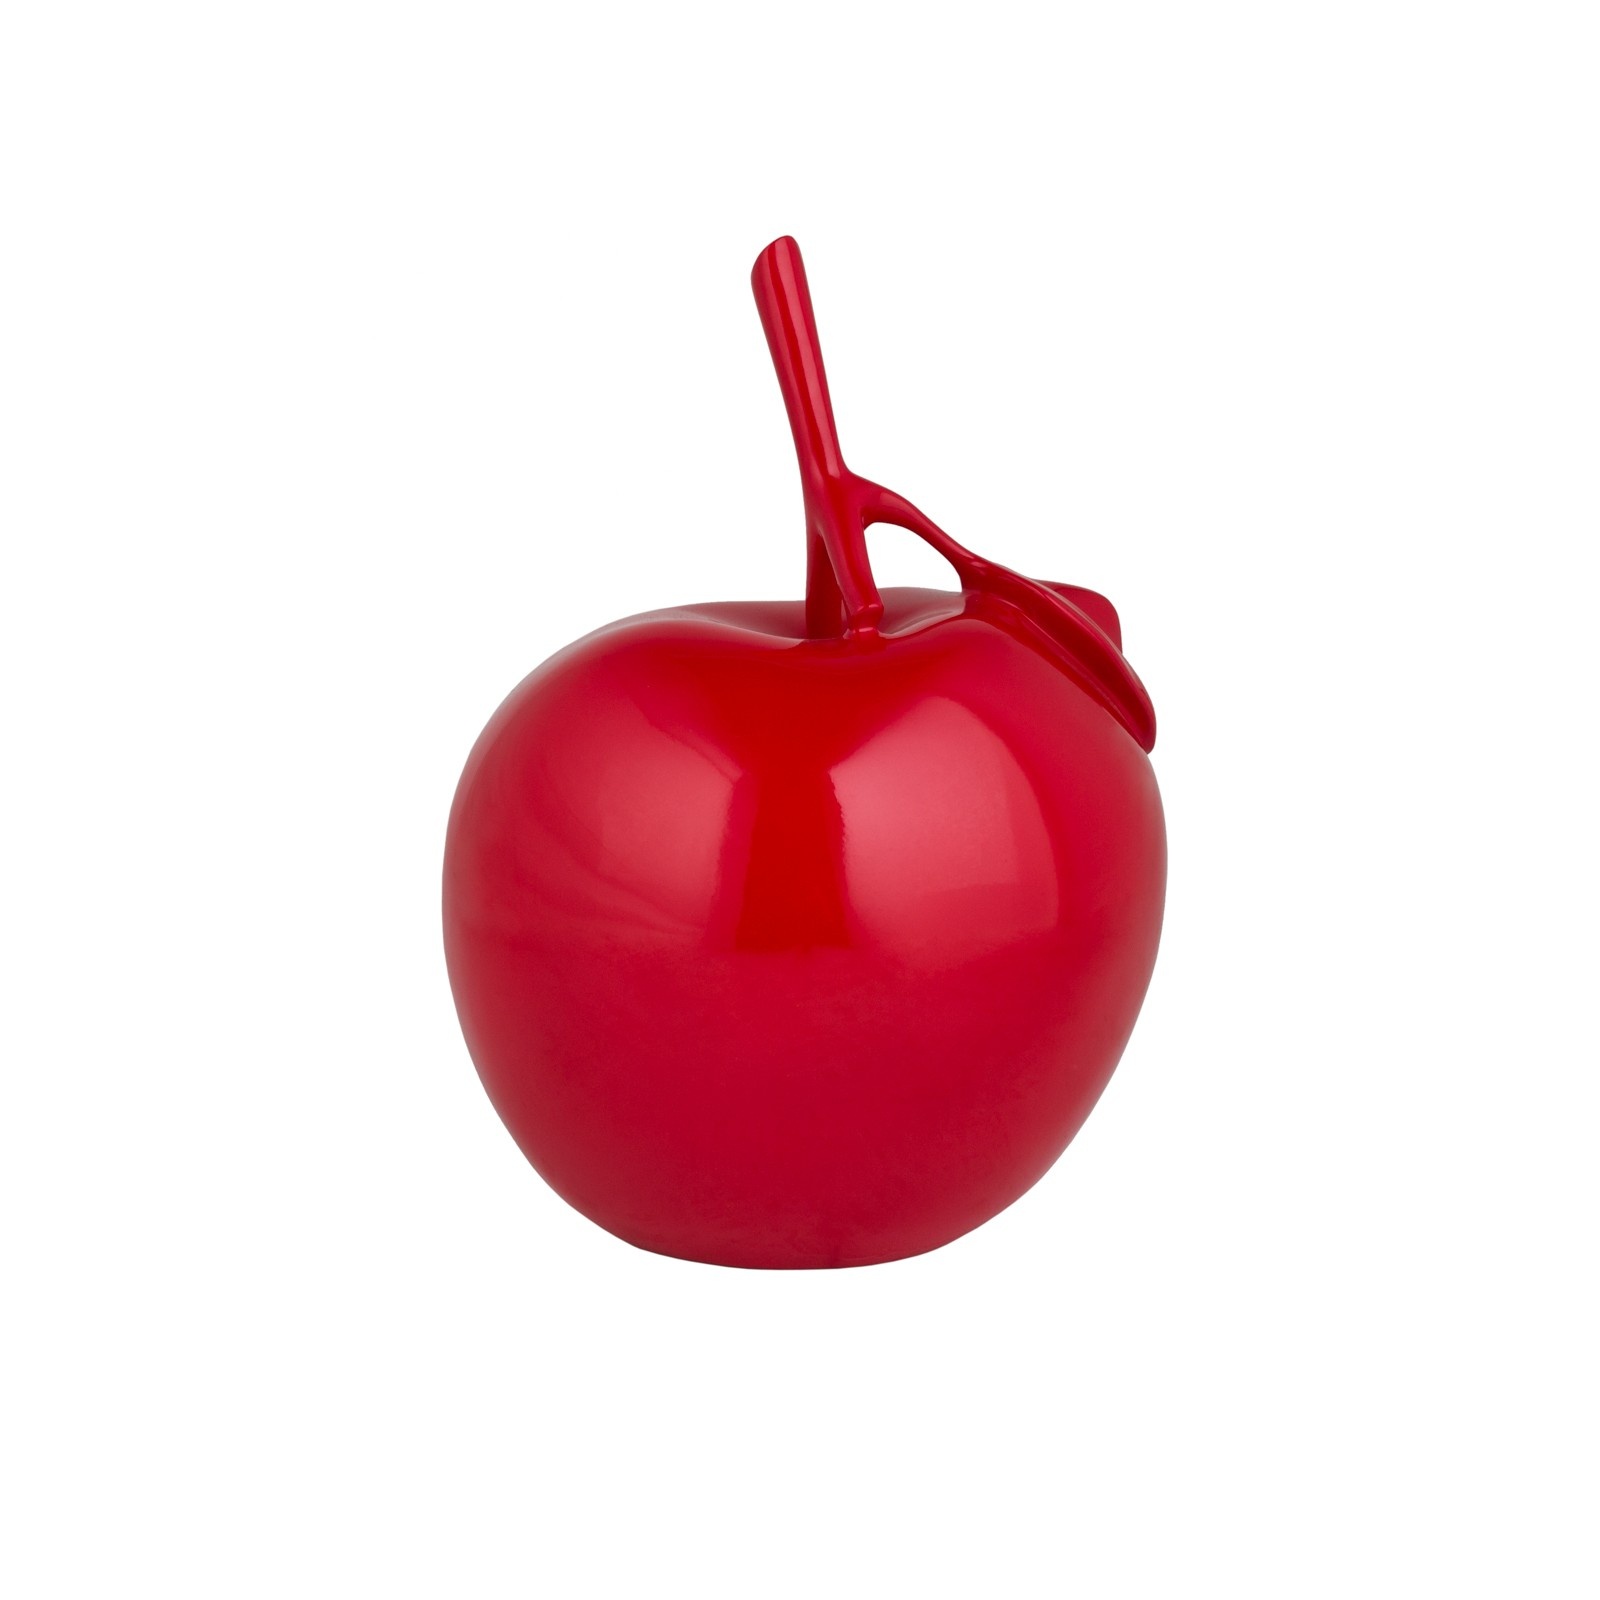 F3864 Apple Sculpture
Available in Multiple Colors